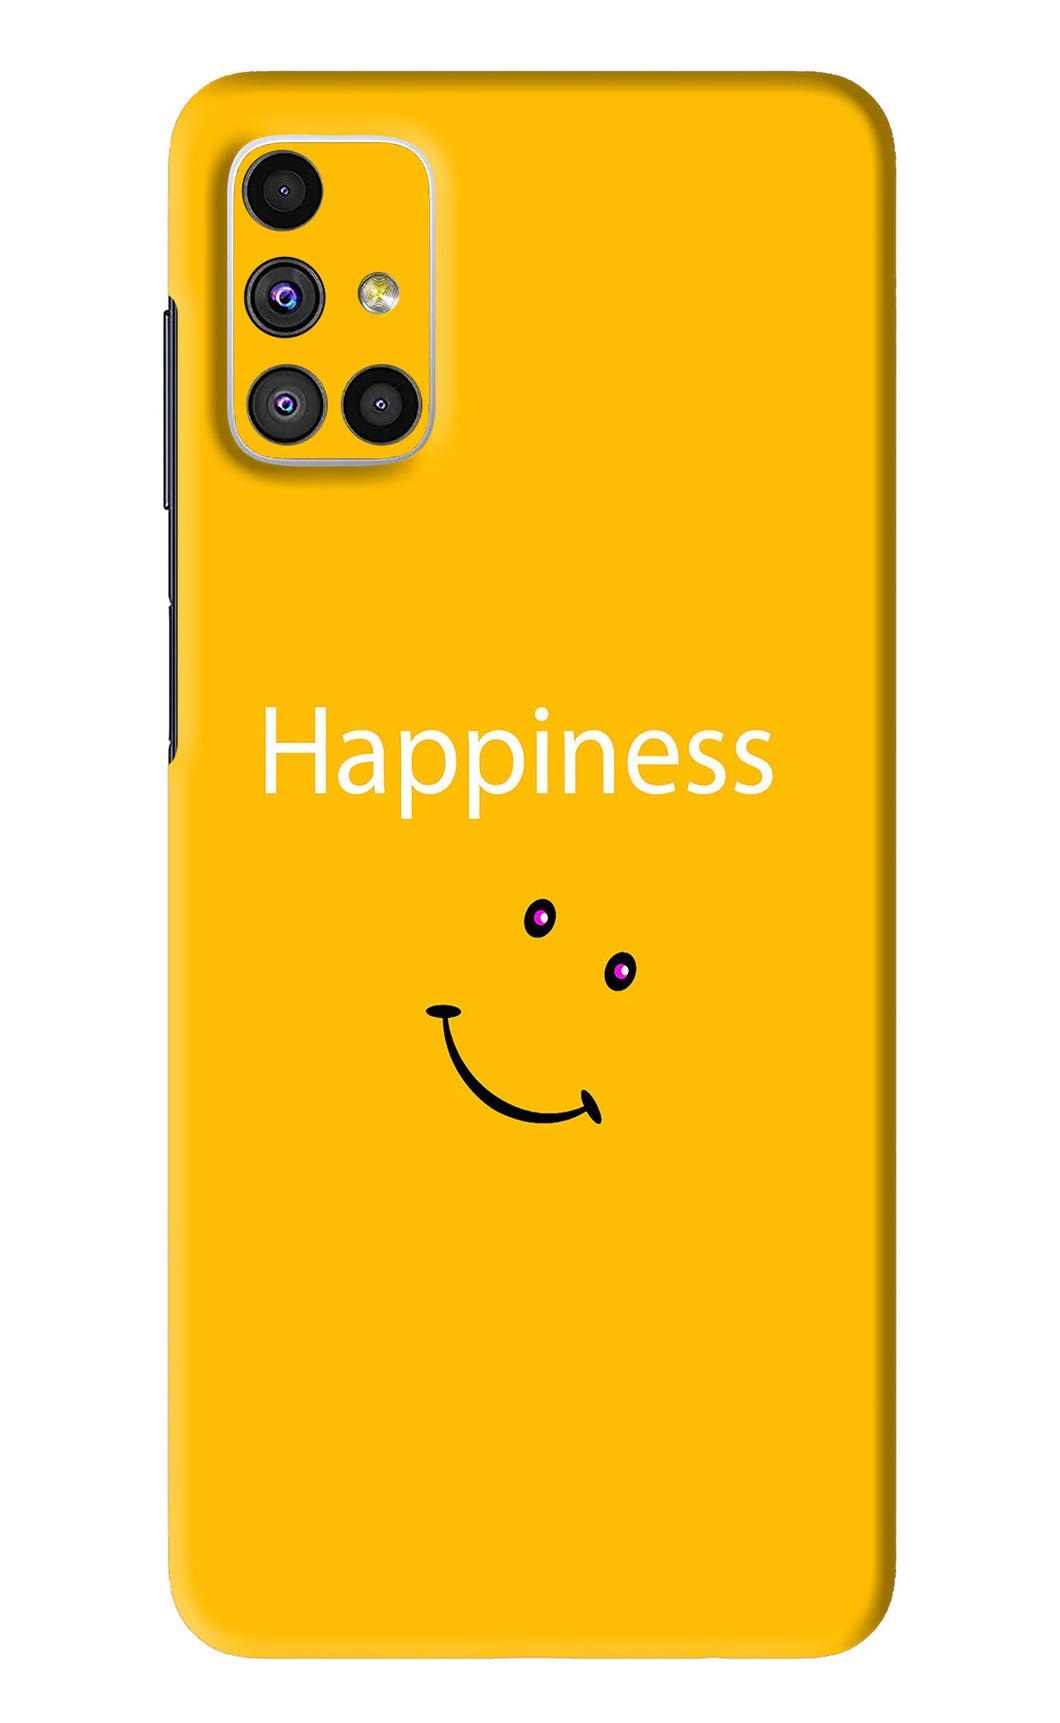 Happiness With Smiley Samsung Galaxy M51 Back Skin Wrap